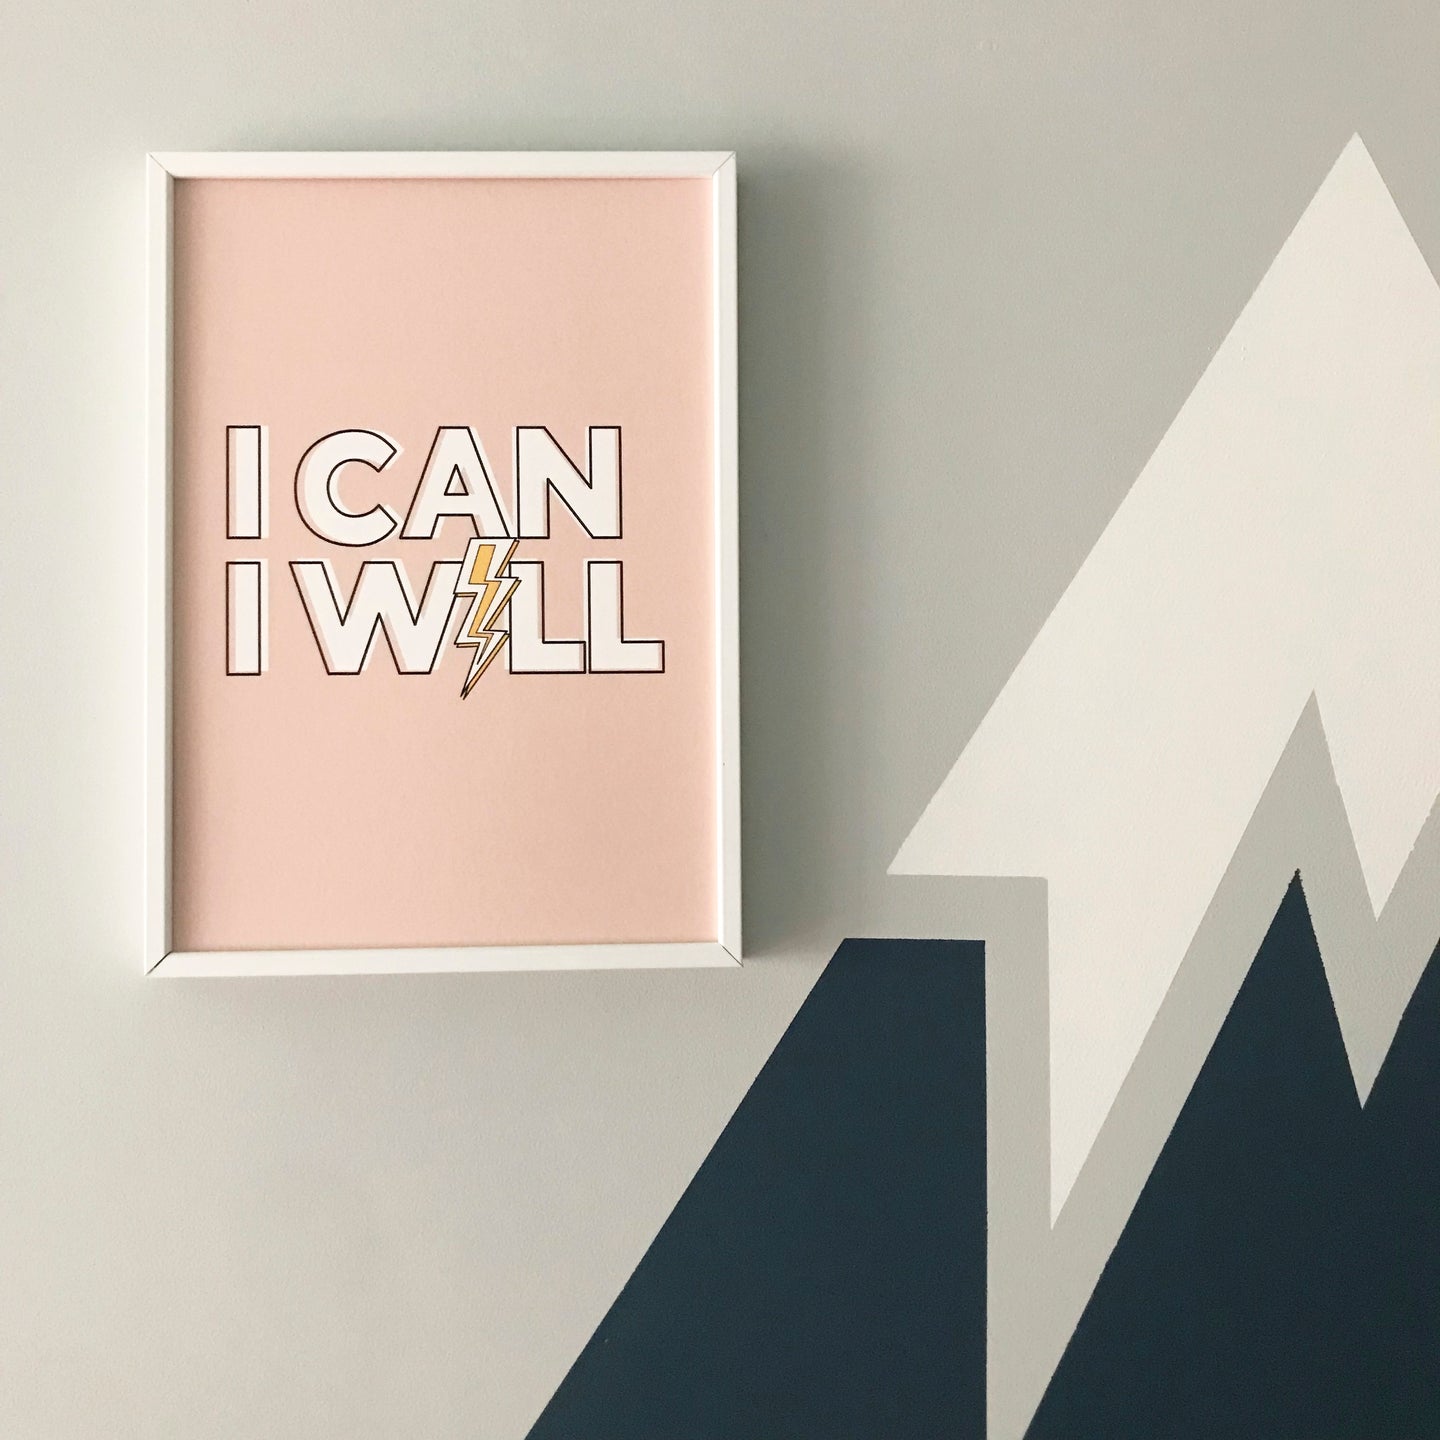 I Can, I Will! Typographic print in dusky pink